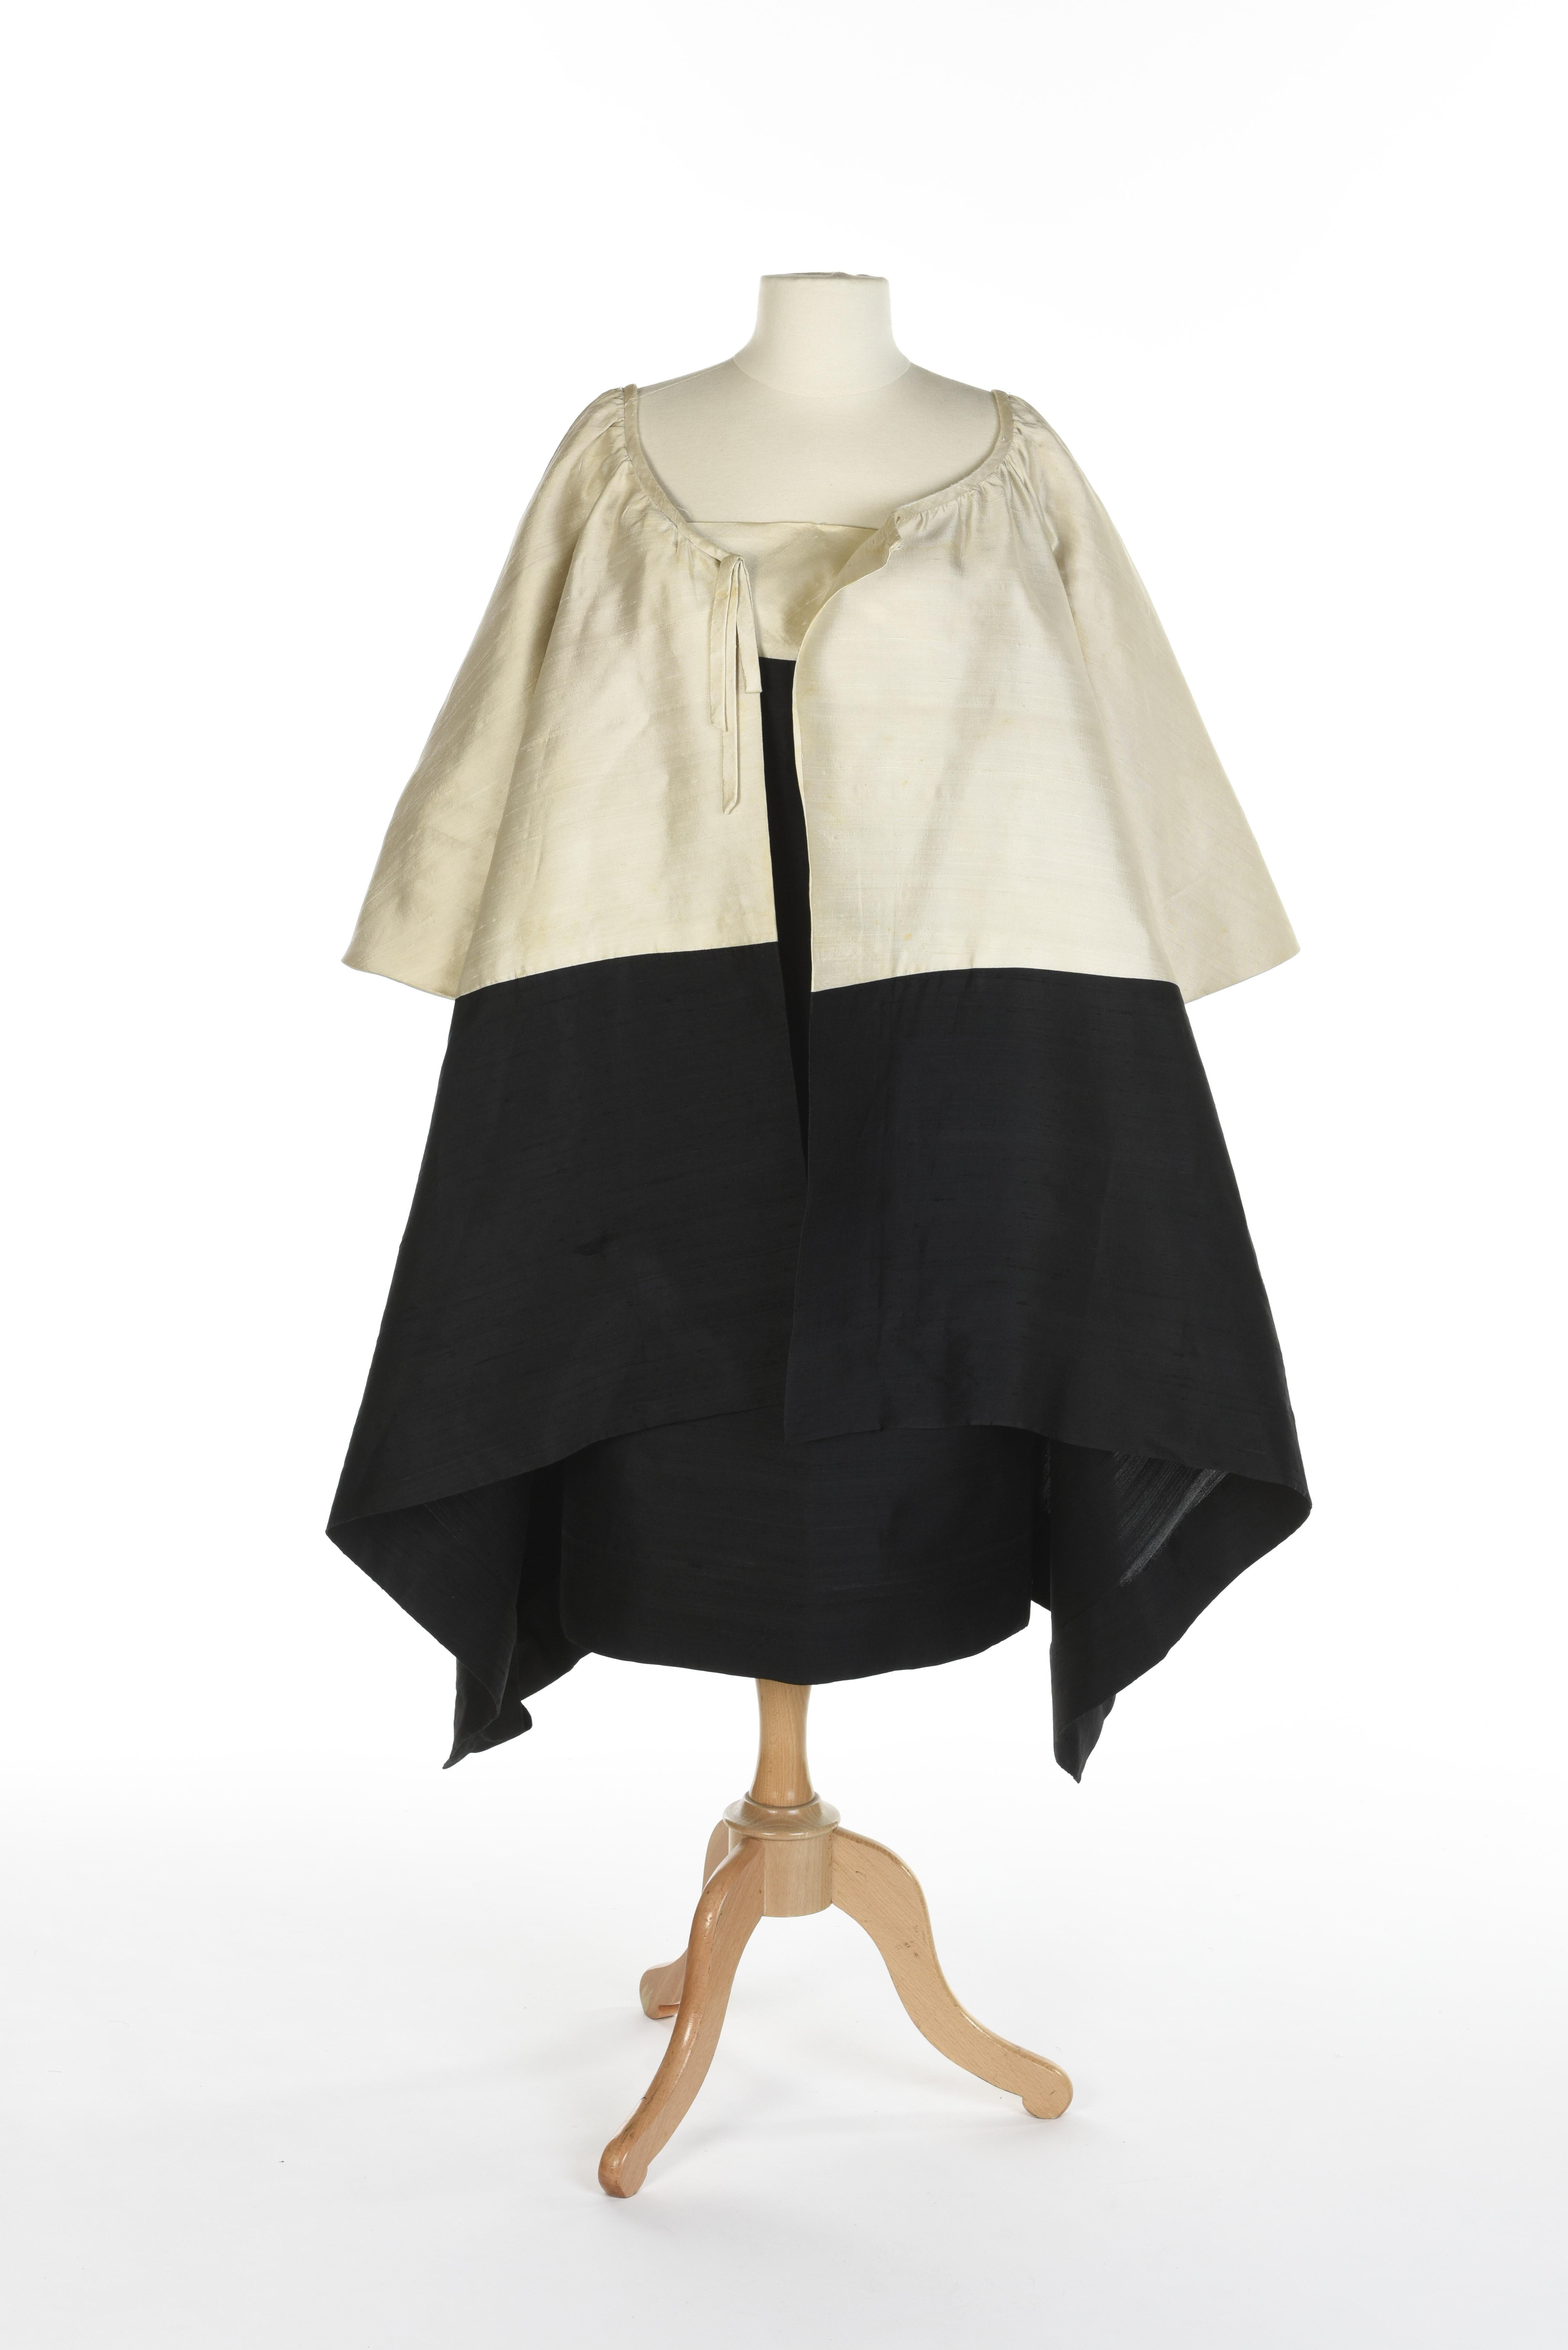 An Hubert de Givenchy French Couture Cream and Black silk Evening Set Circa 1965 In Good Condition For Sale In Toulon, FR